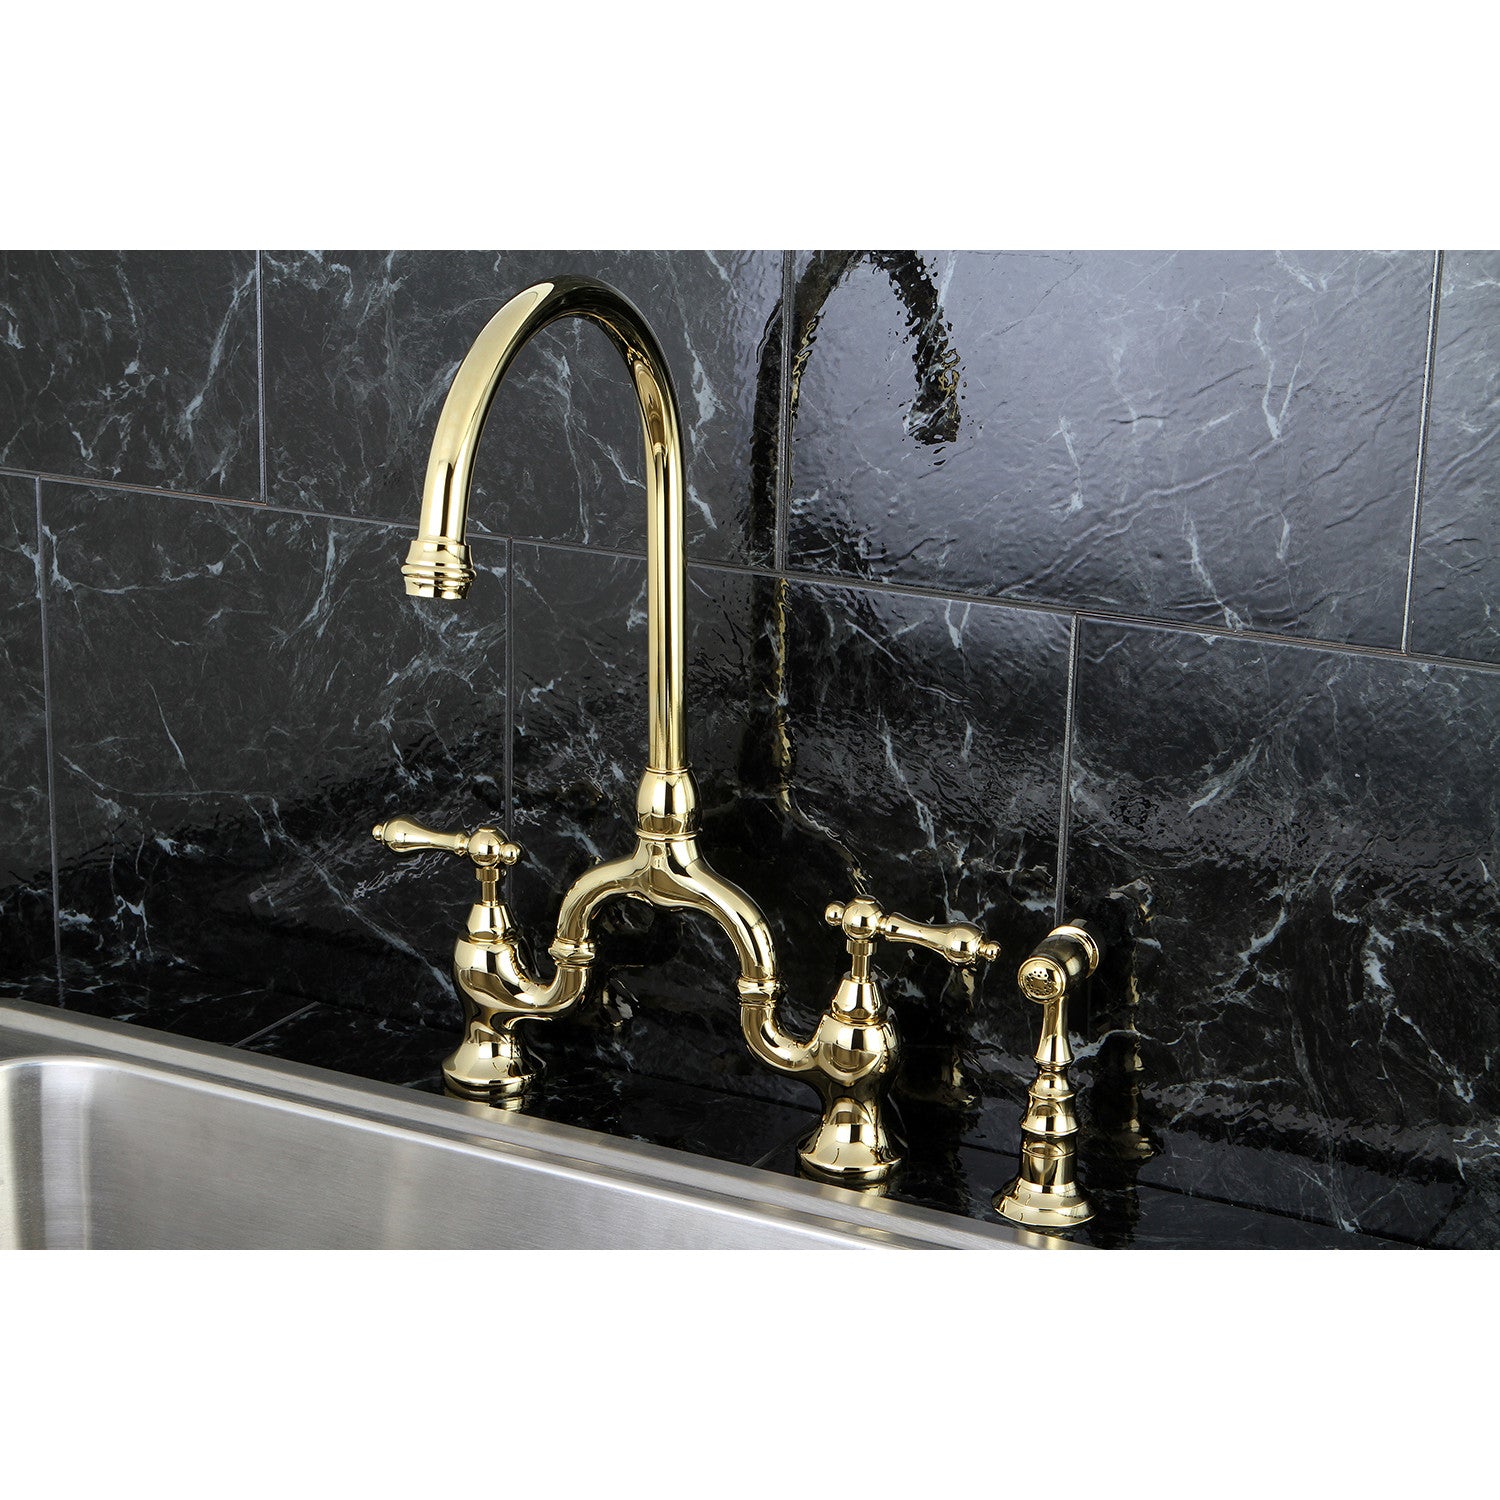 Kingston Brass English Country Bridge Faucet with Accessories